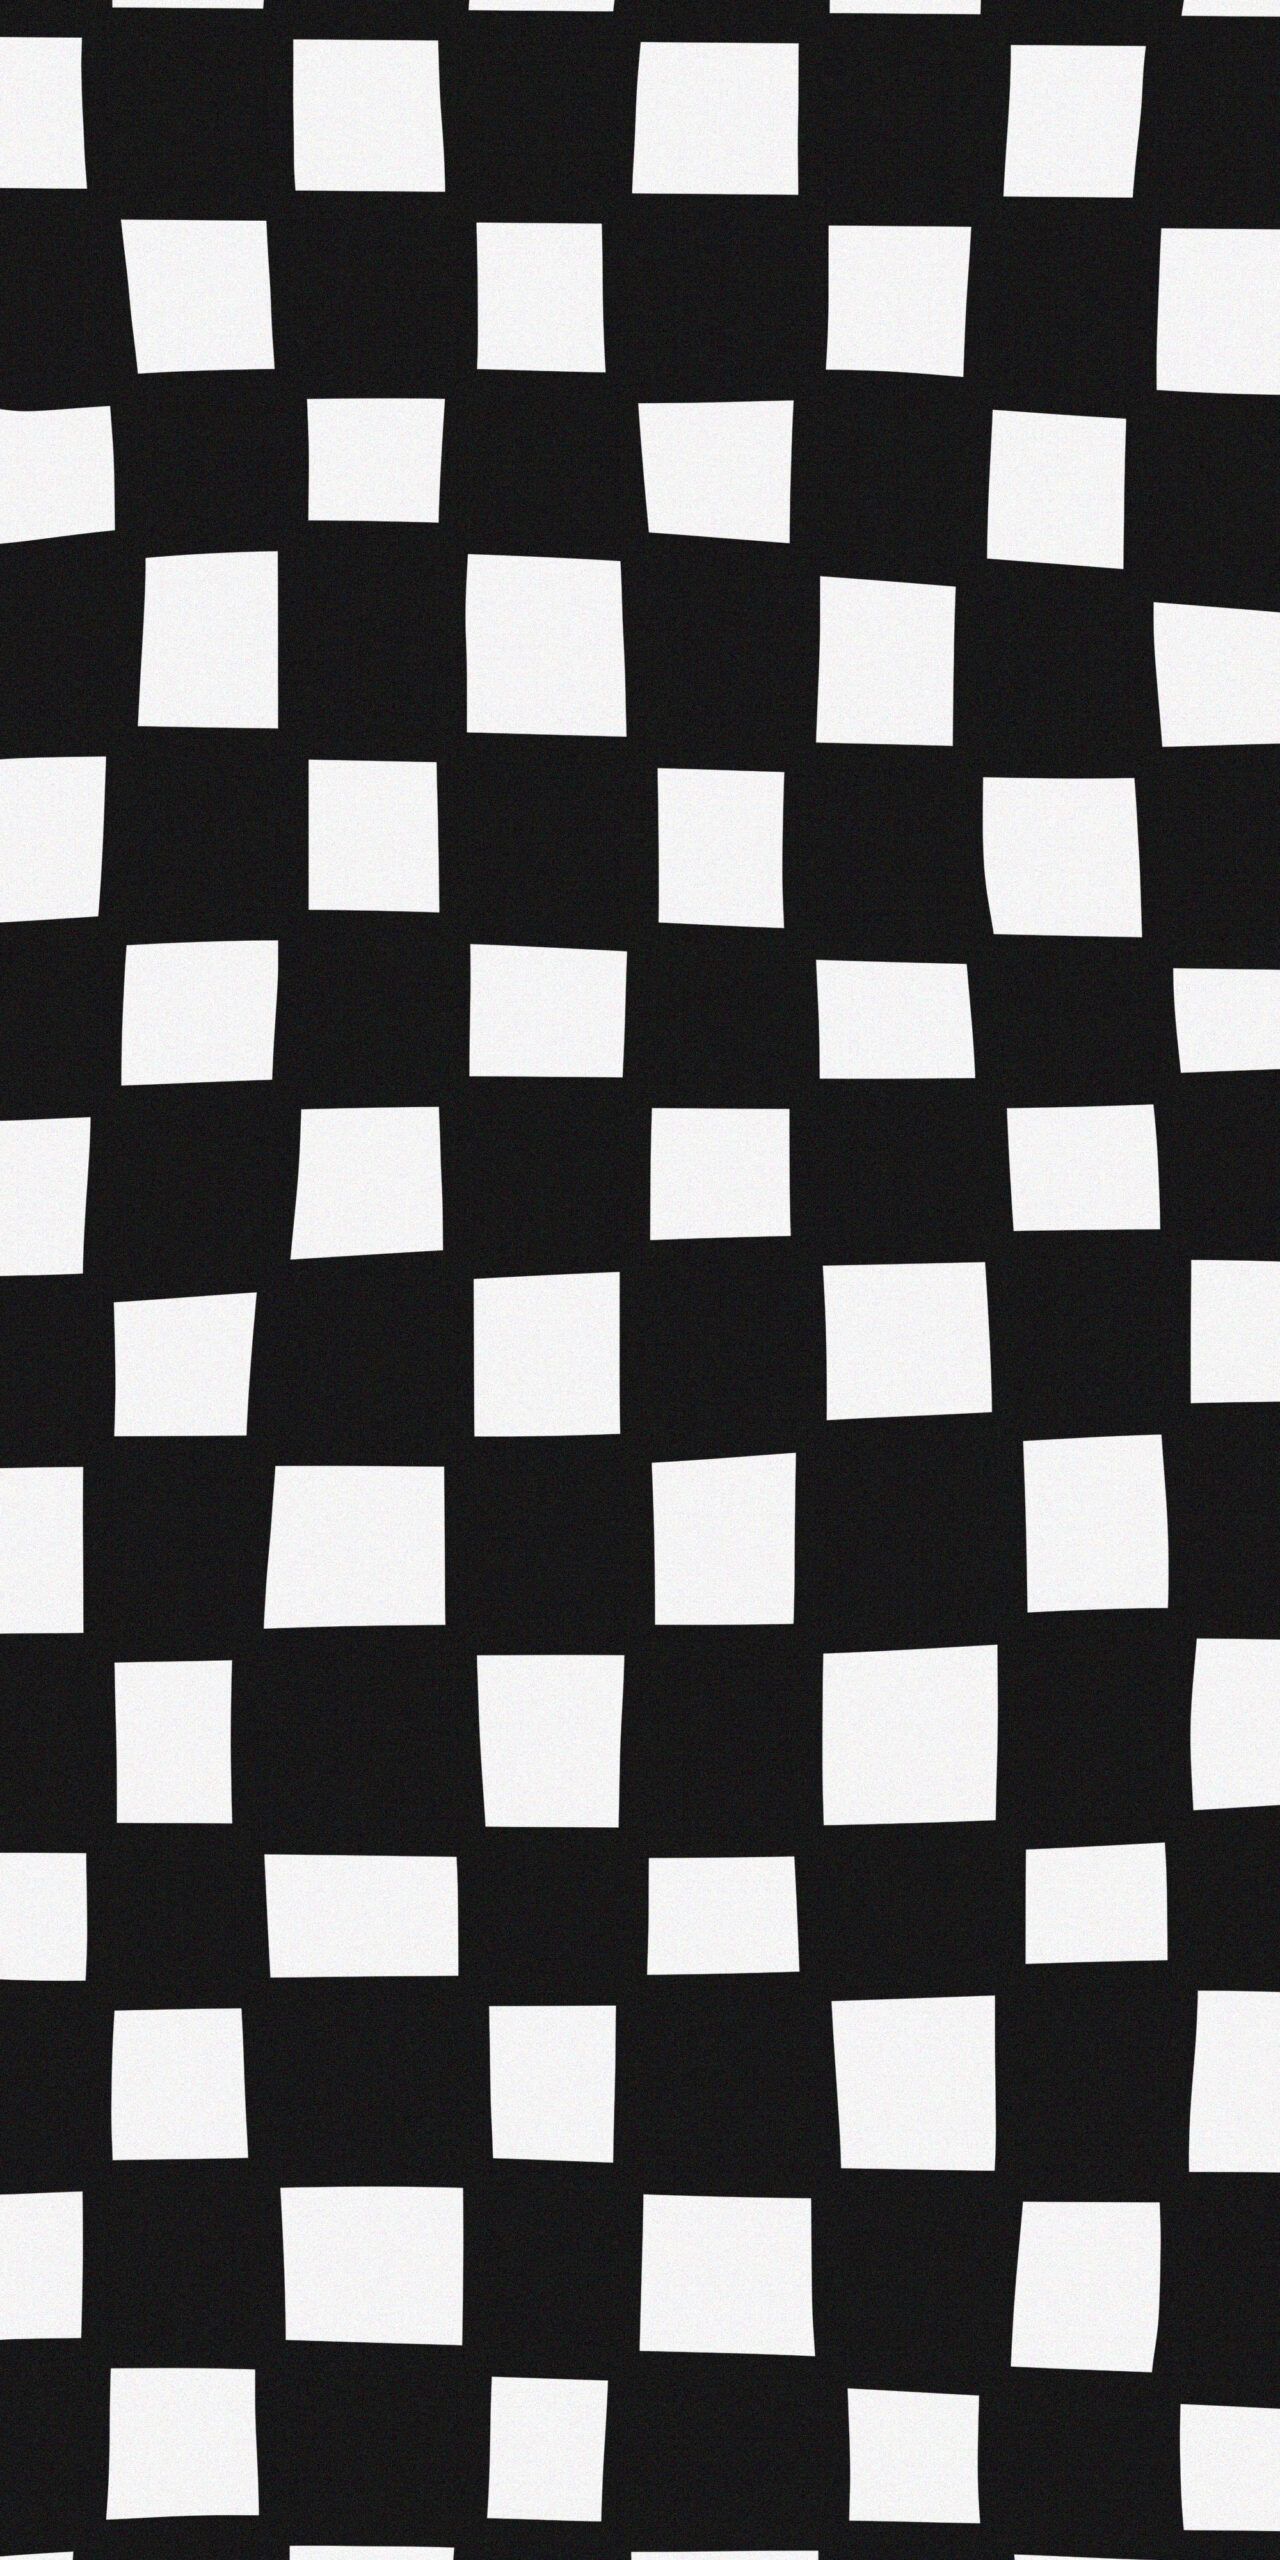 A black and white pattern of squares - Black and white, chess